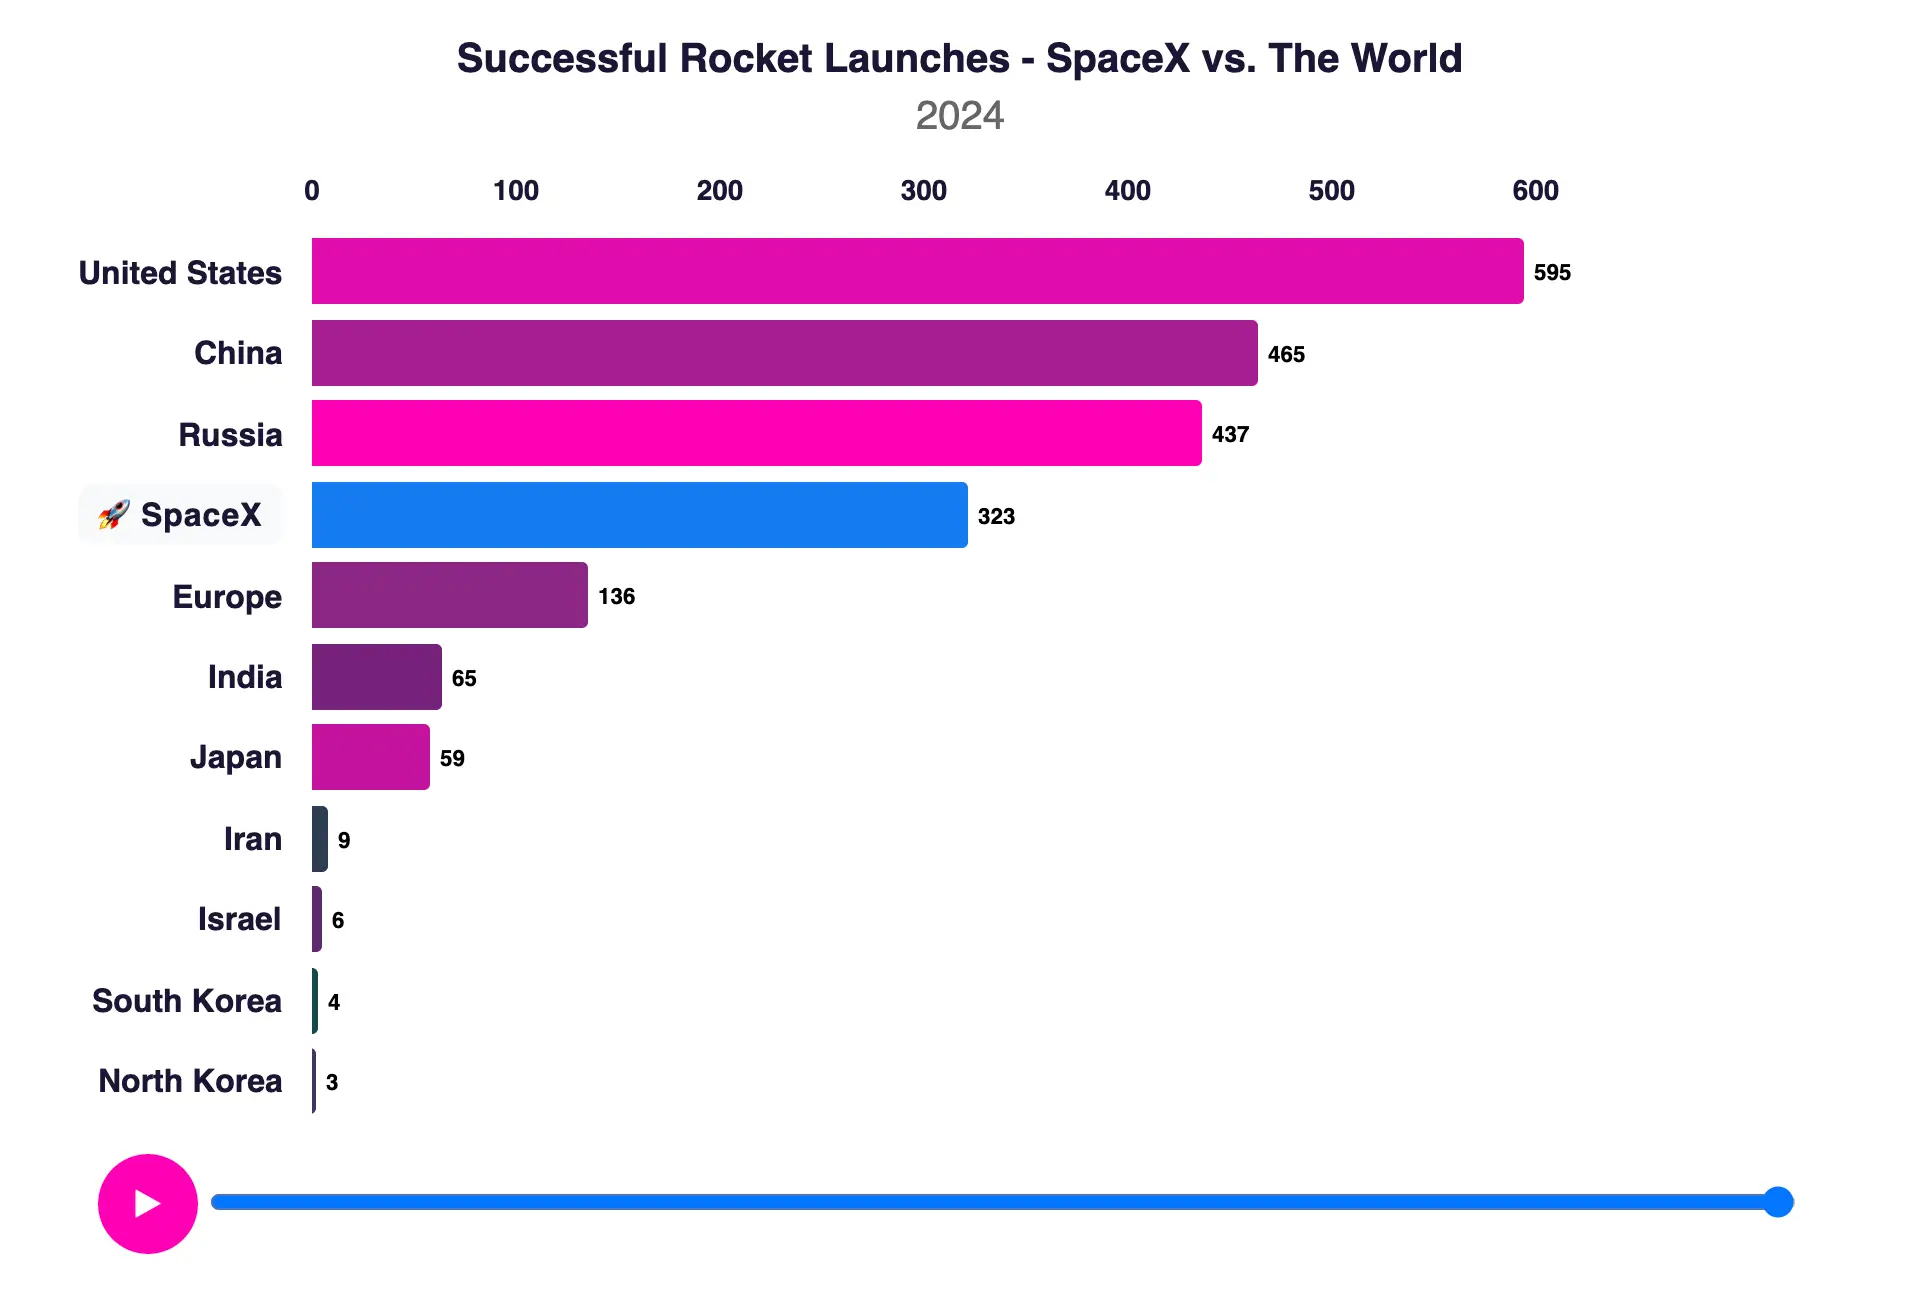 Race chart depicting the number of successful rocket launches per year by country, highlighting the leading nations in space exploration in years 2005-2024.